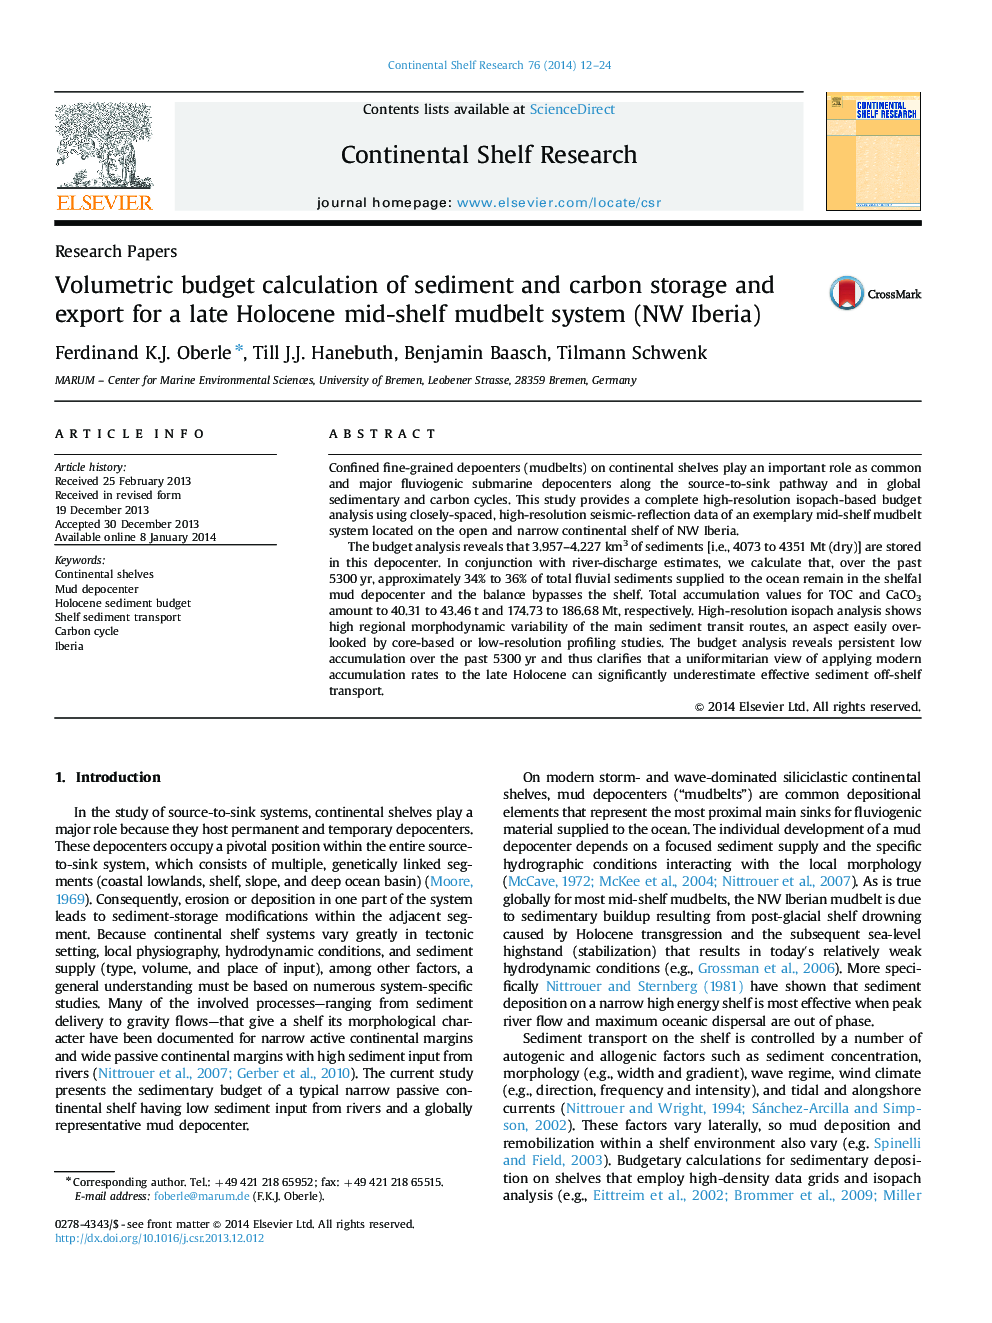 Volumetric budget calculation of sediment and carbon storage and export for a late Holocene mid-shelf mudbelt system (NW Iberia)